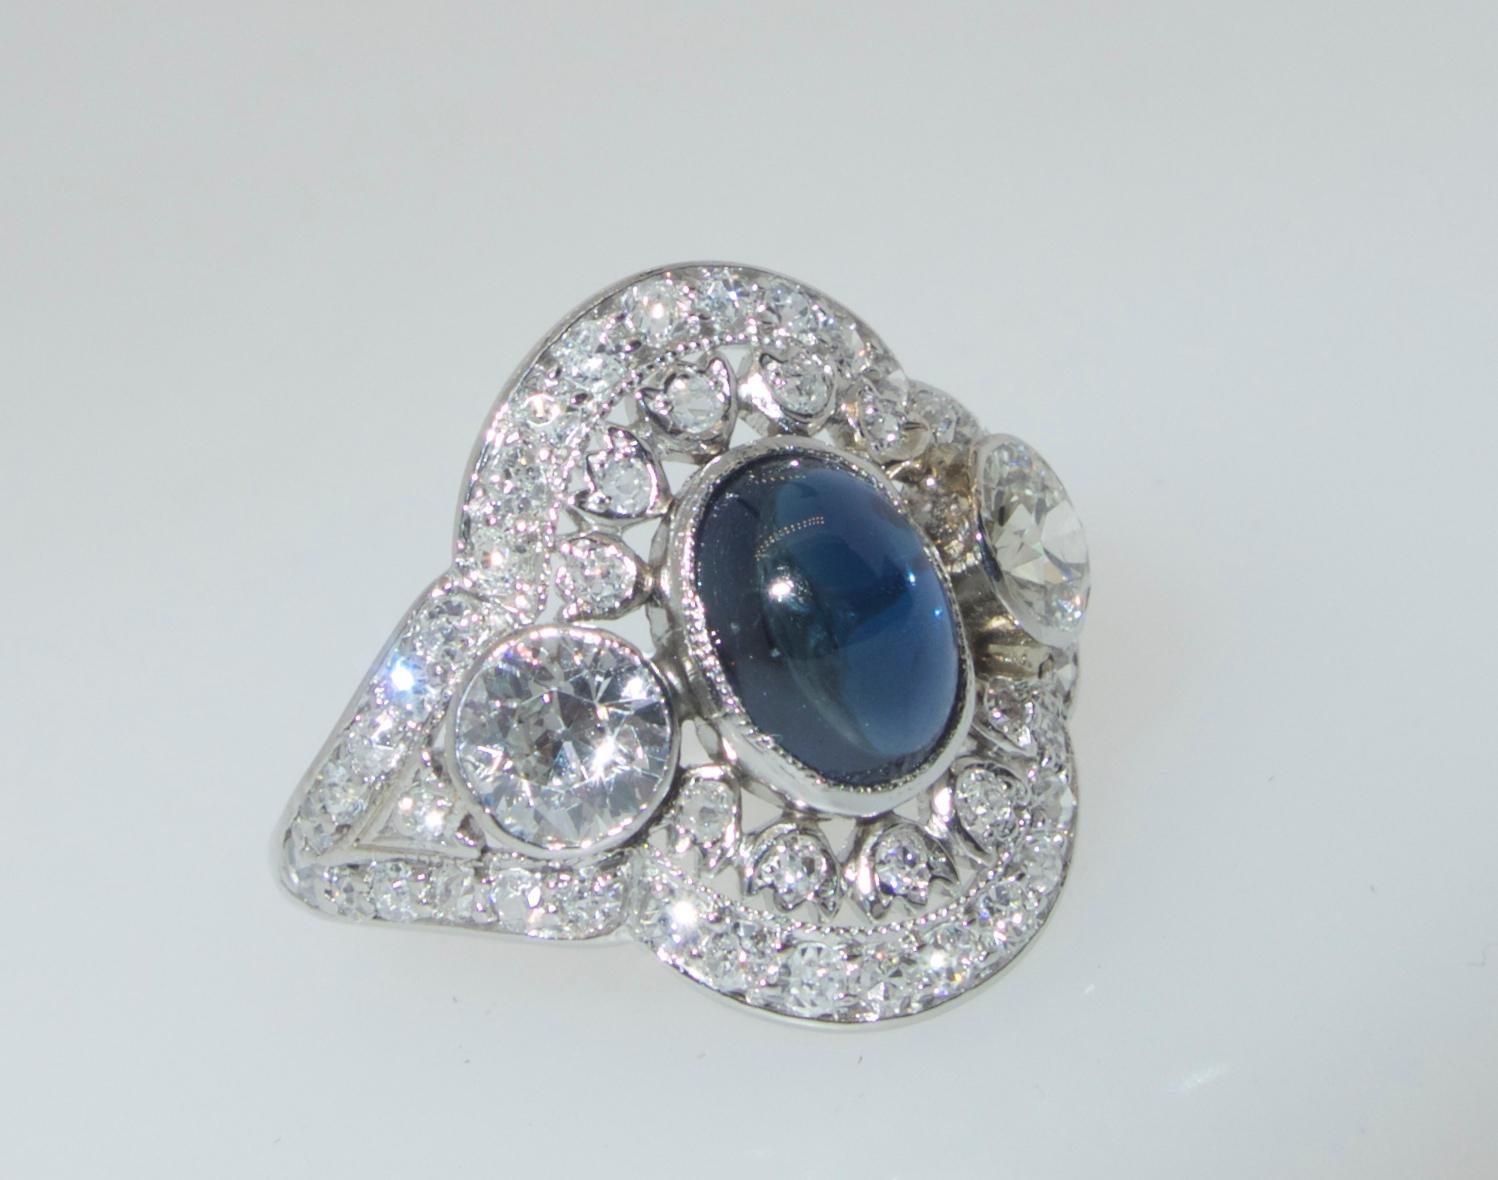 Edwardian platinum ring with fine white diamonds accenting the center fine blue natural, unheated vibrant sapphire.  The European cut diamonds  are white, (H), and very slightly included (VS).  The center sapphire is unheated, a vibrant deep blue